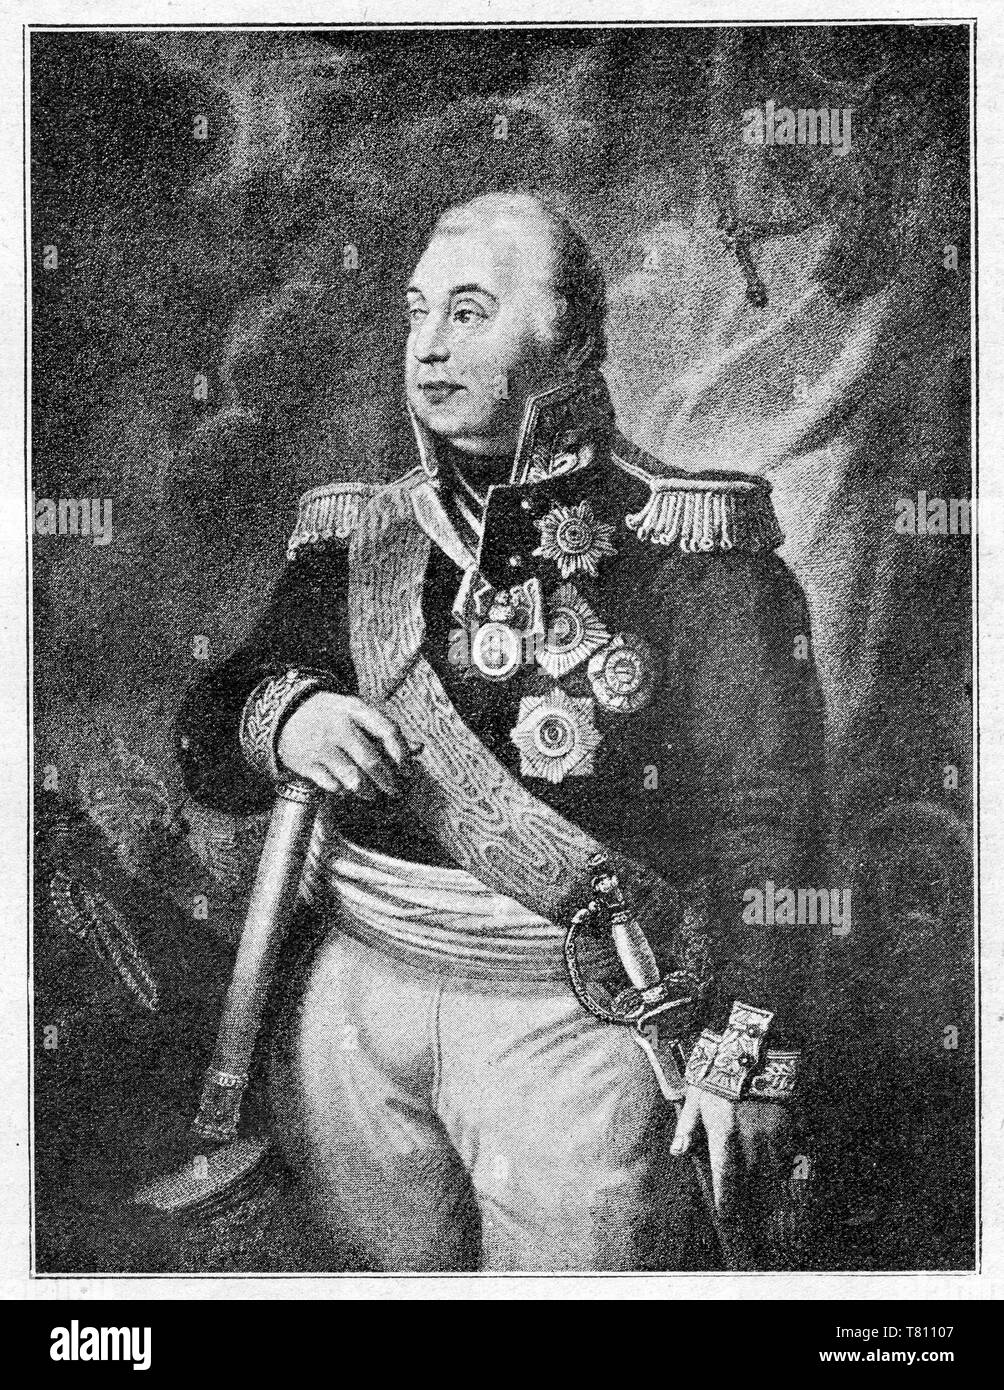 Mikhail Kutuzov, Russian army commander who repelled Napoleon’s invasion of Russia (1812). Digital improved reproduction from Illustrated overview of the life of mankind in the 19th century, 1901 edition, Marx publishing house, St. Petersburg Stock Photo